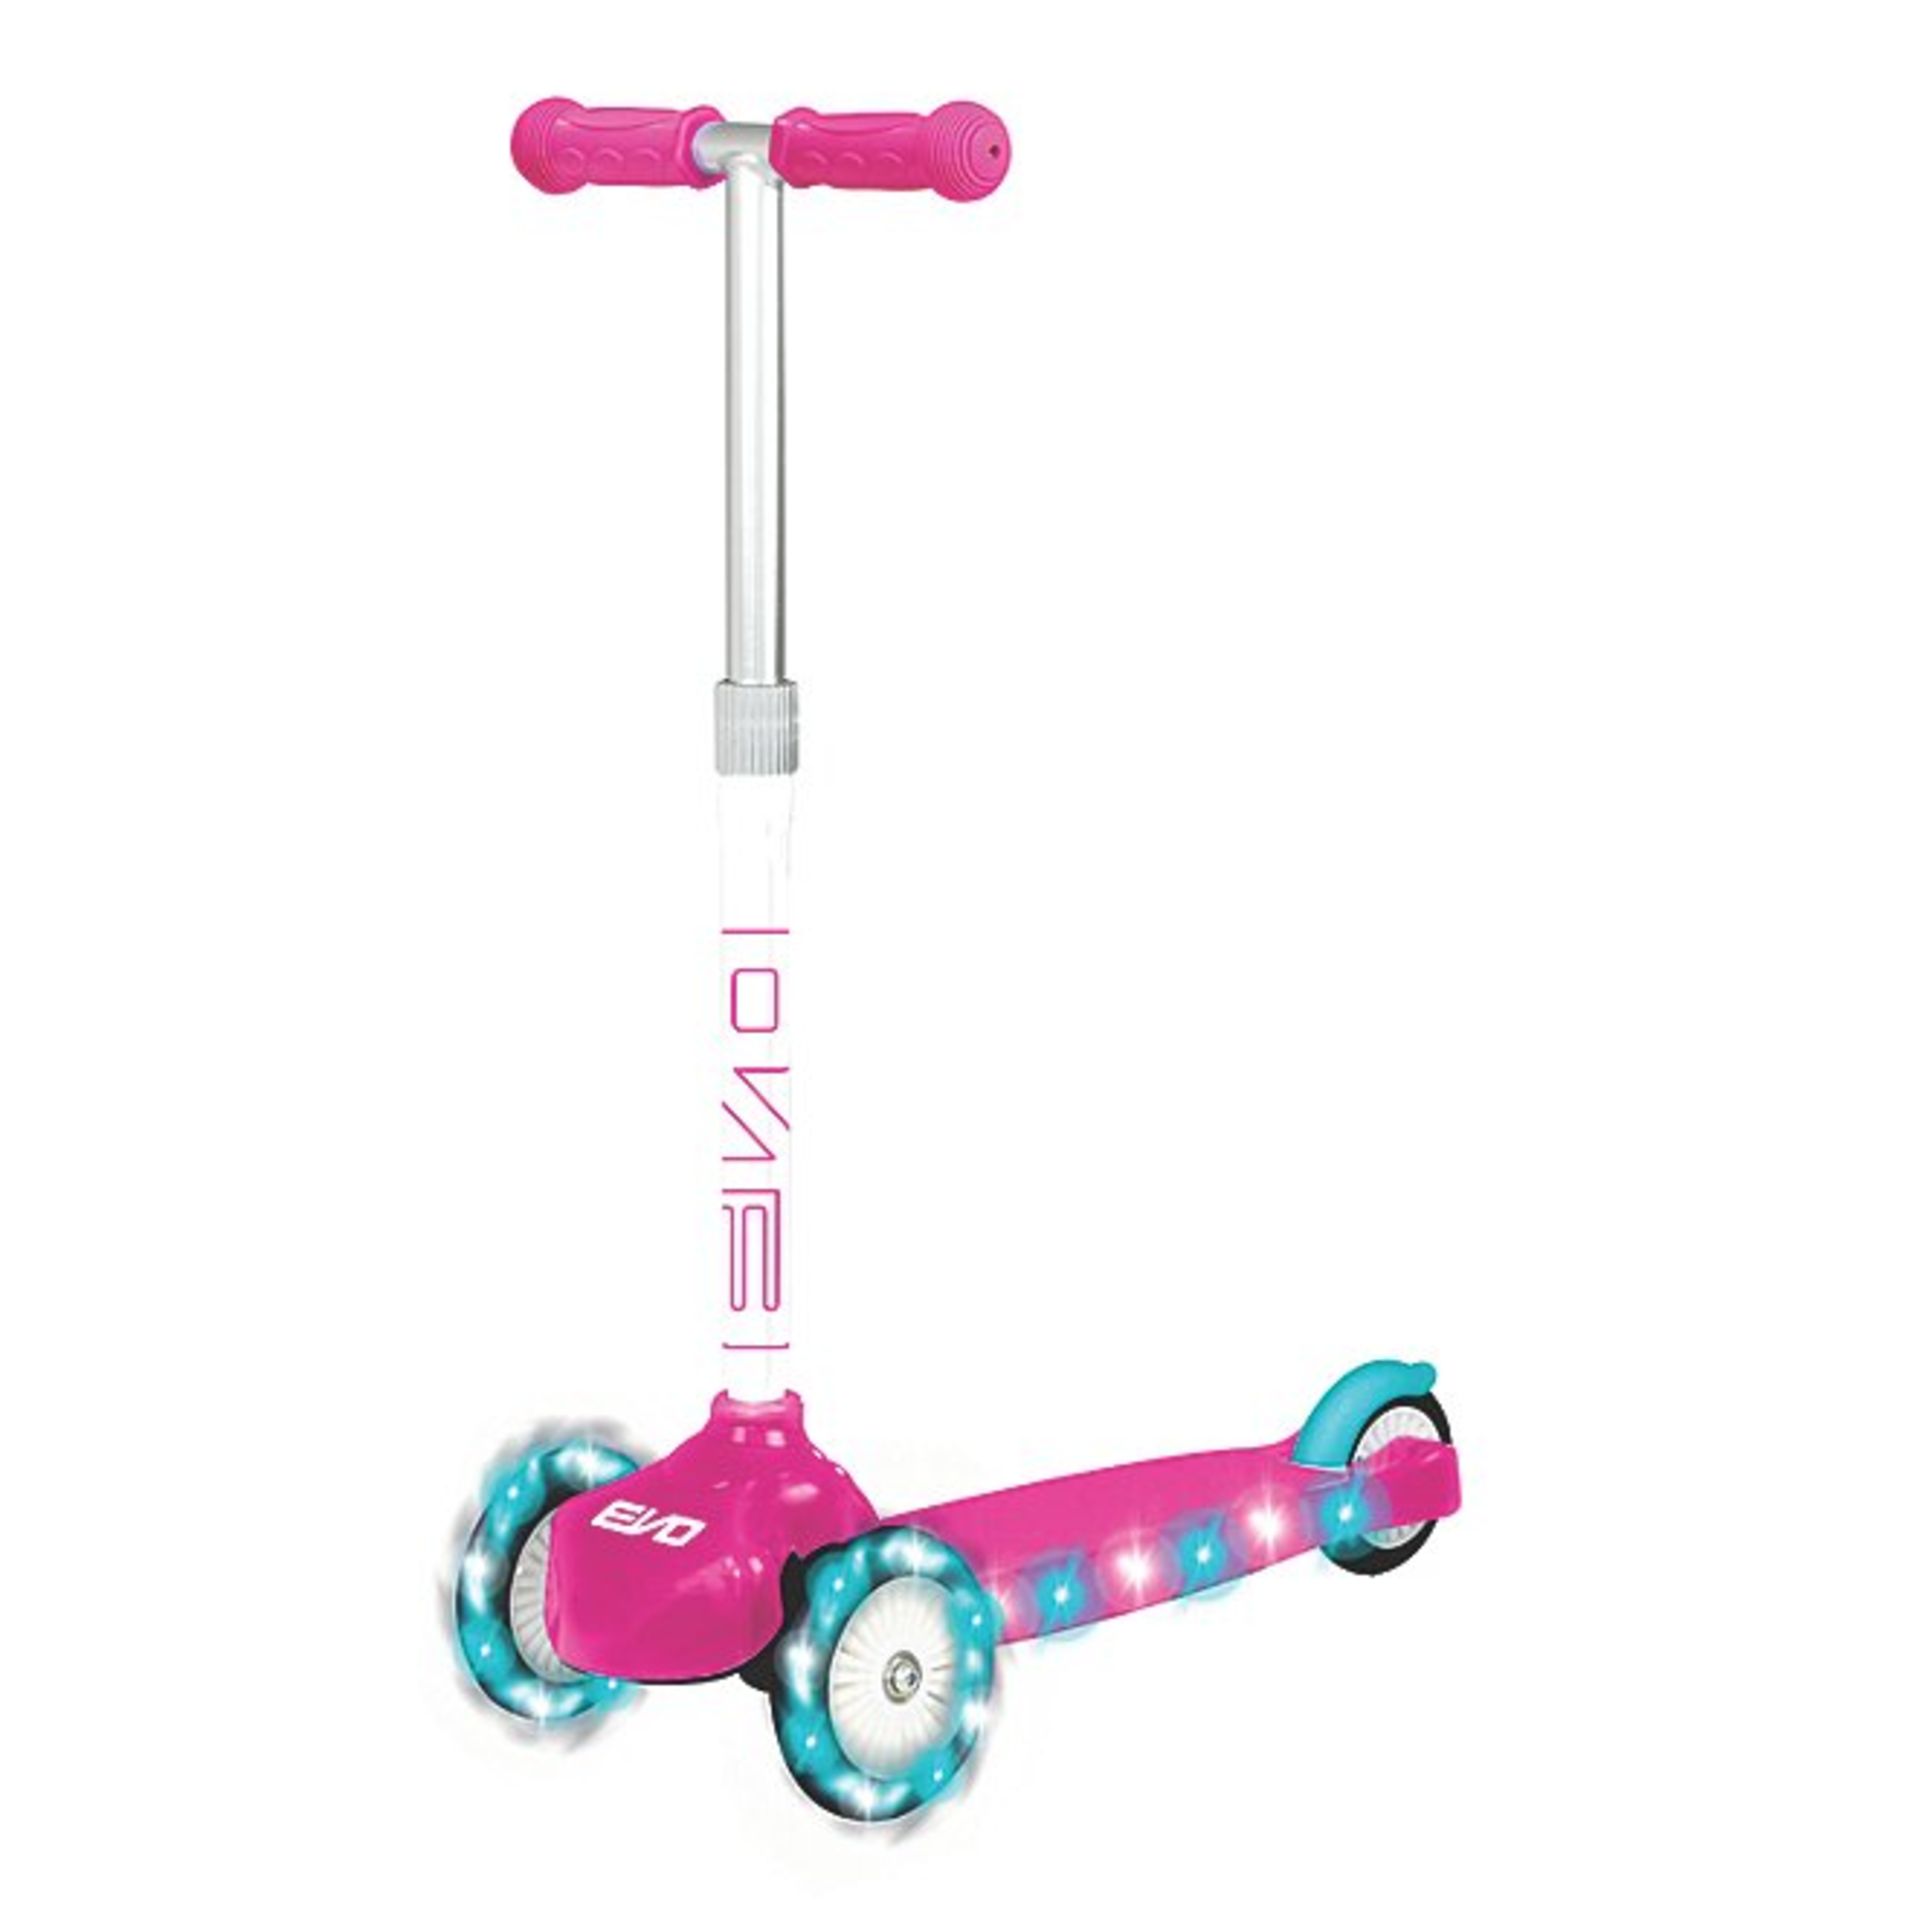 (R5K) Toys. 5 Items. 2 x Evo Light Up Move N Groove Scooter (1 X Pink & 1 X Blue), 1 X Nuby Musical